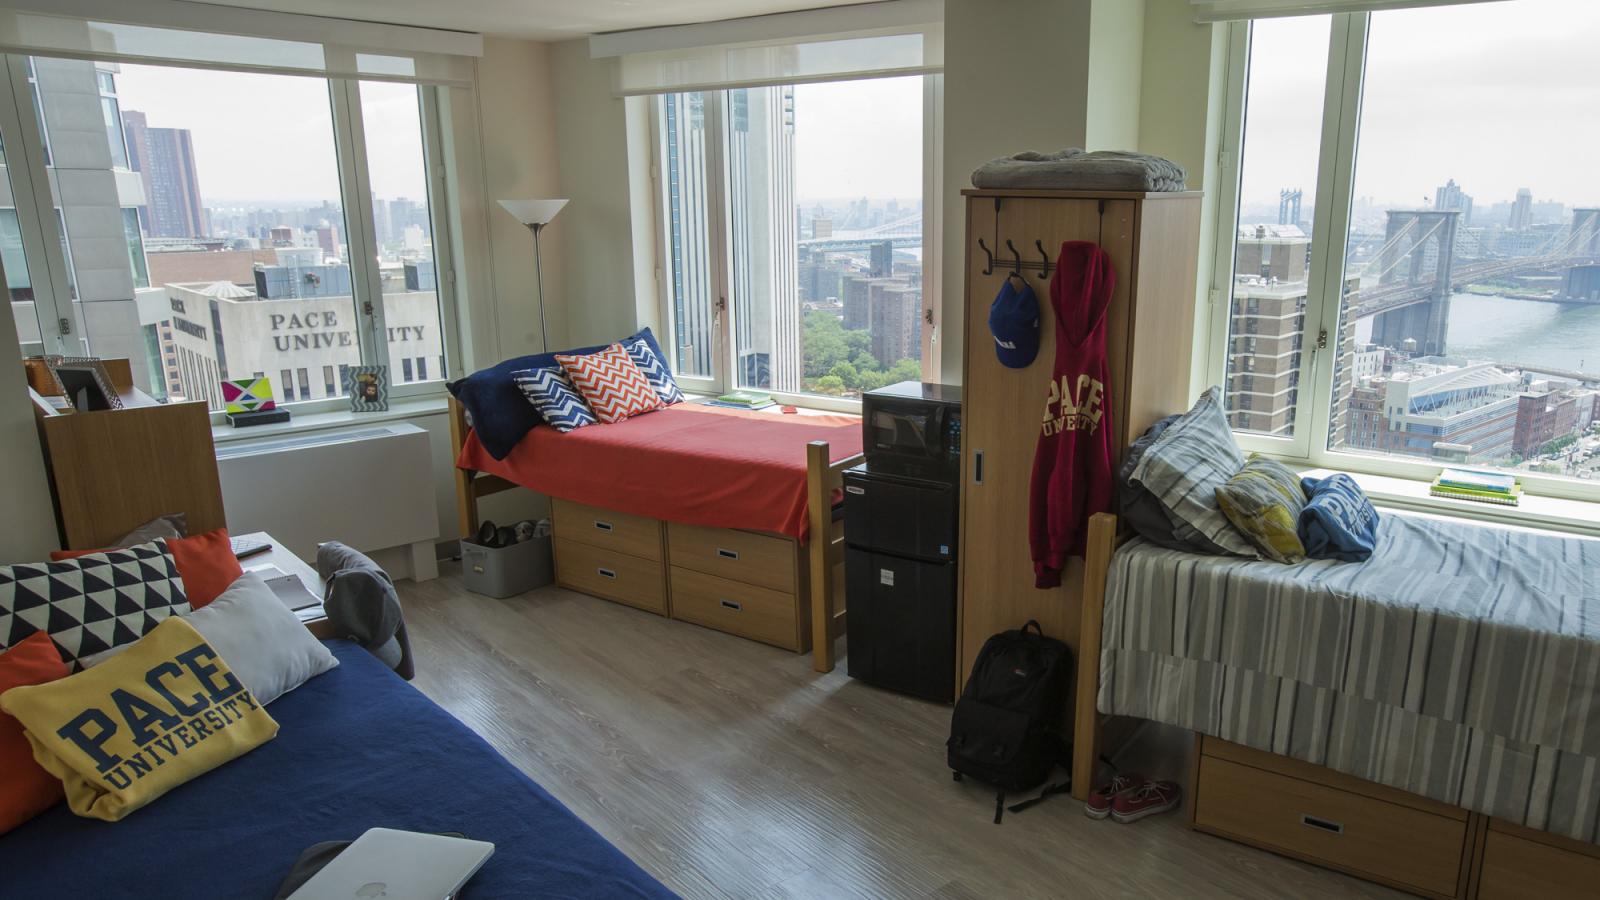 Dorms on the NYC campus.